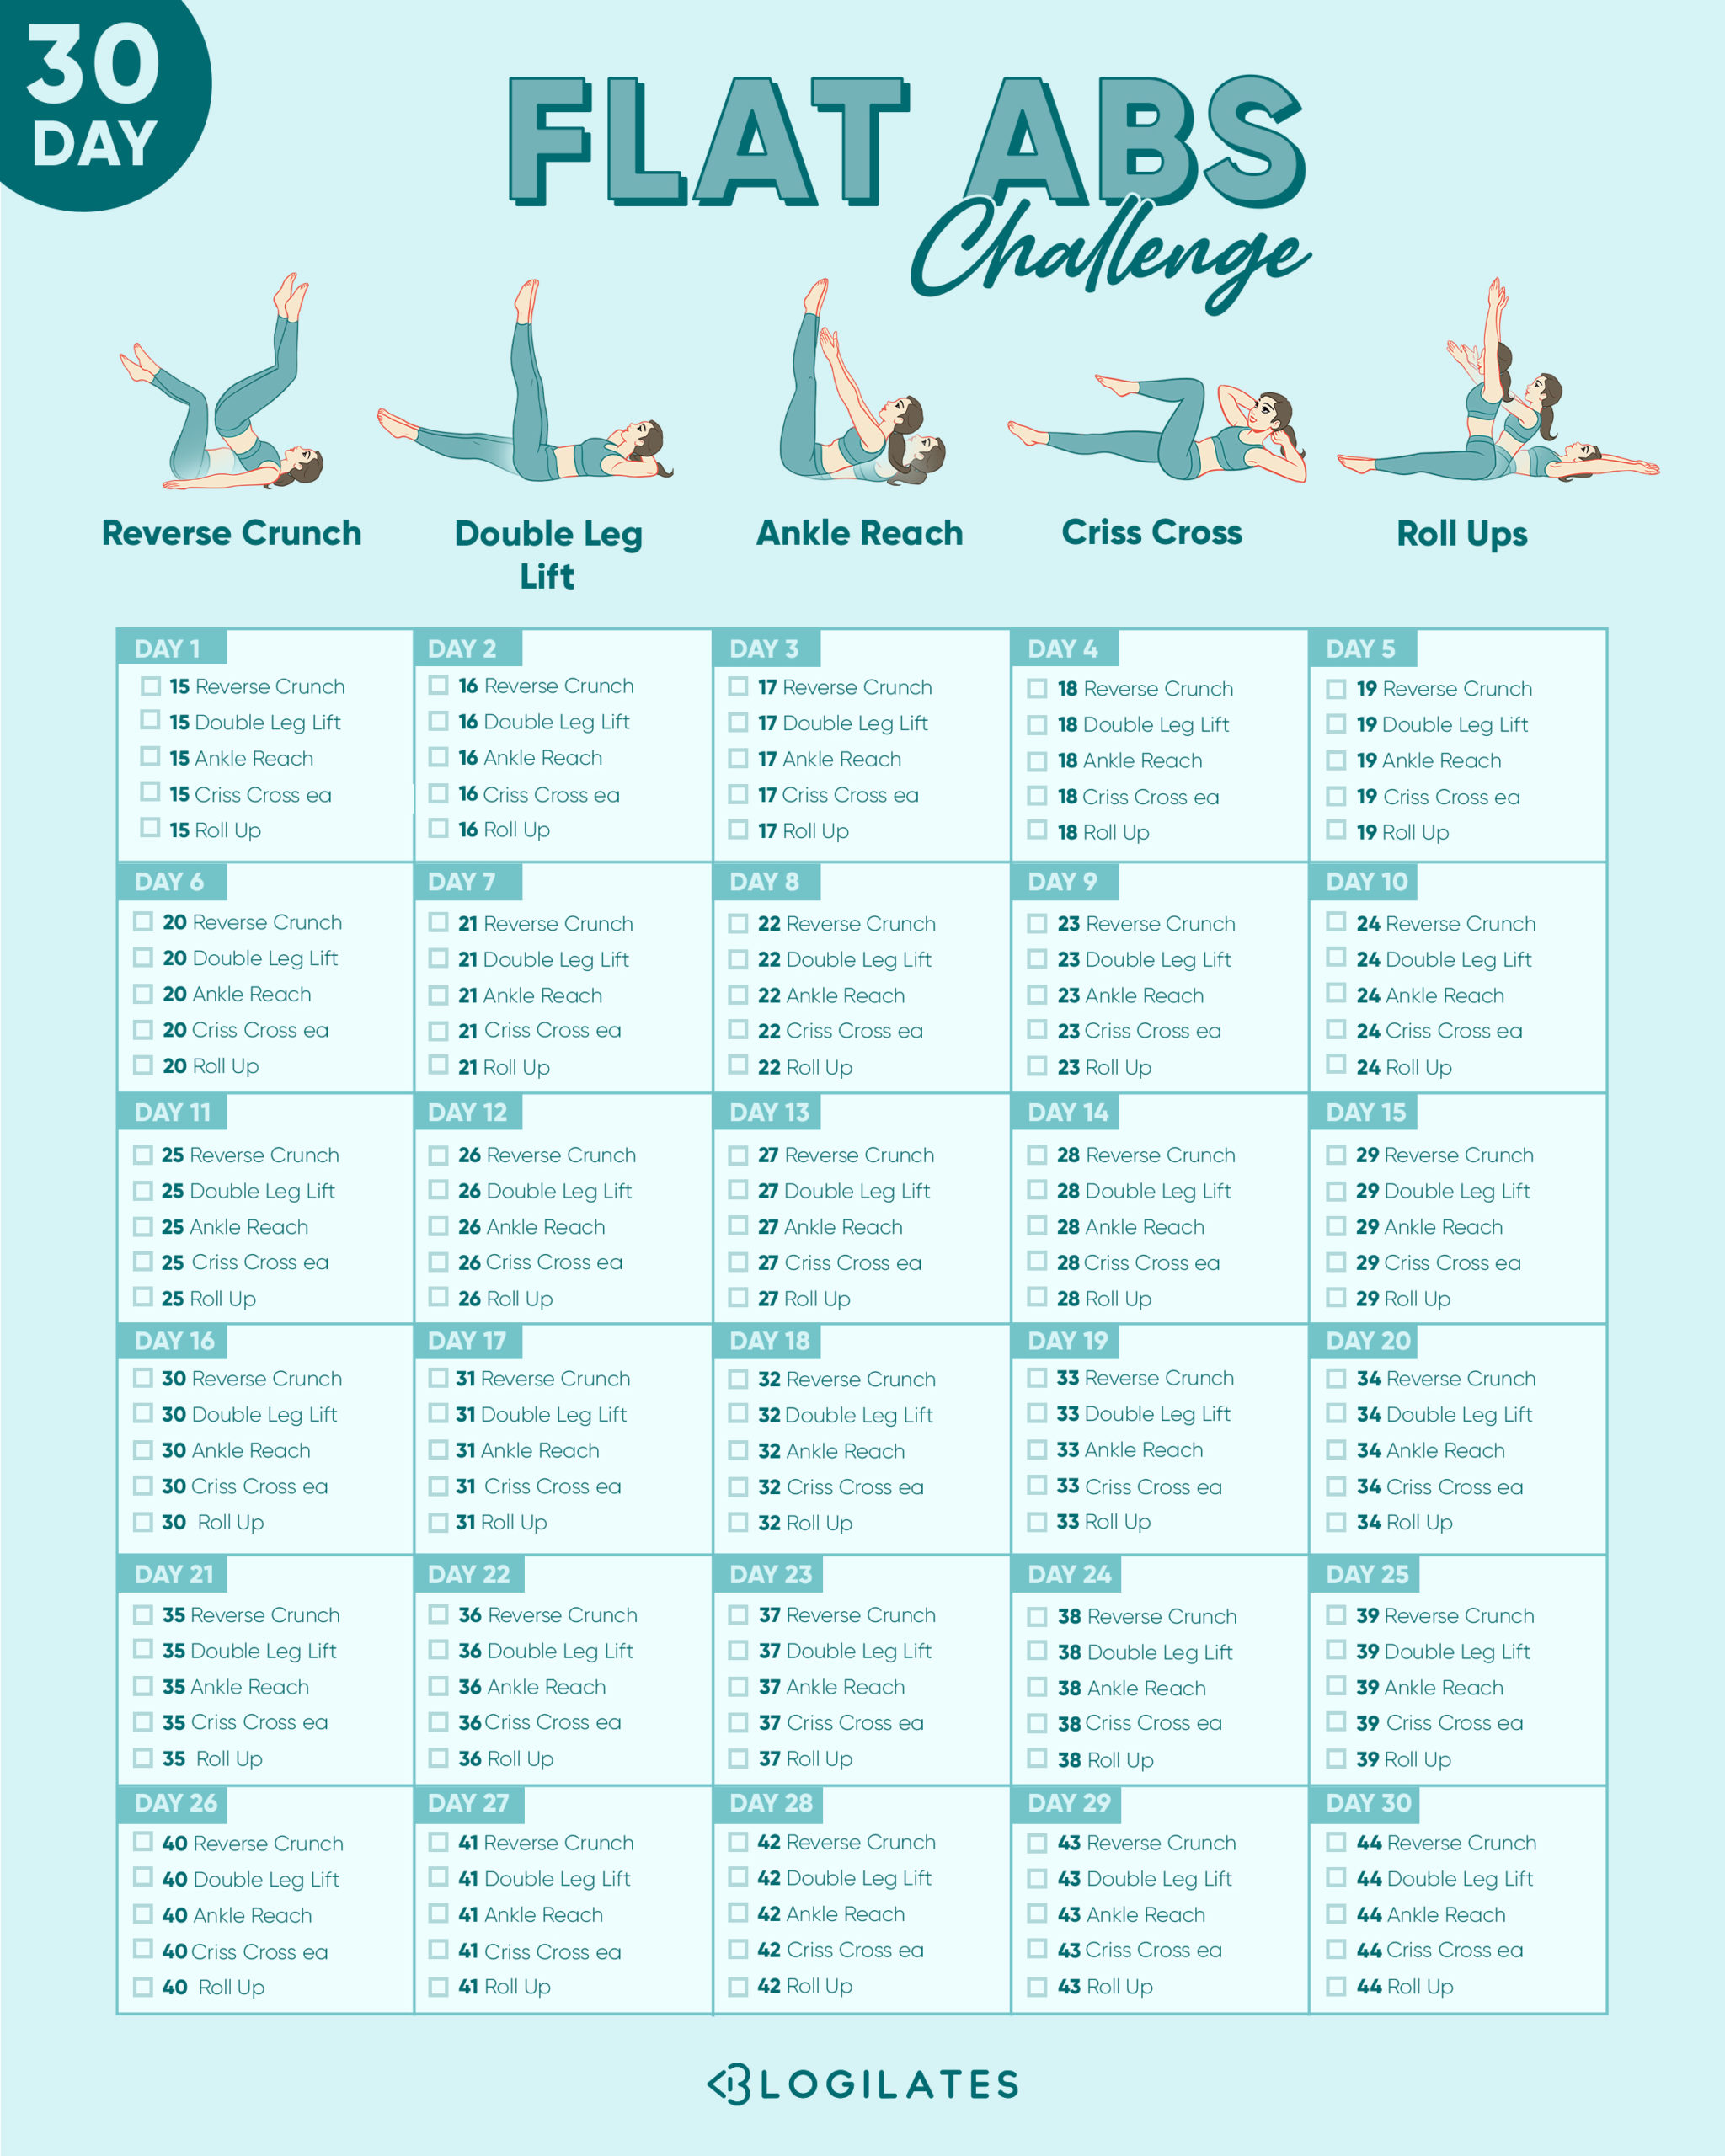 30 Day Flat Abs Challenge! - Blogilates